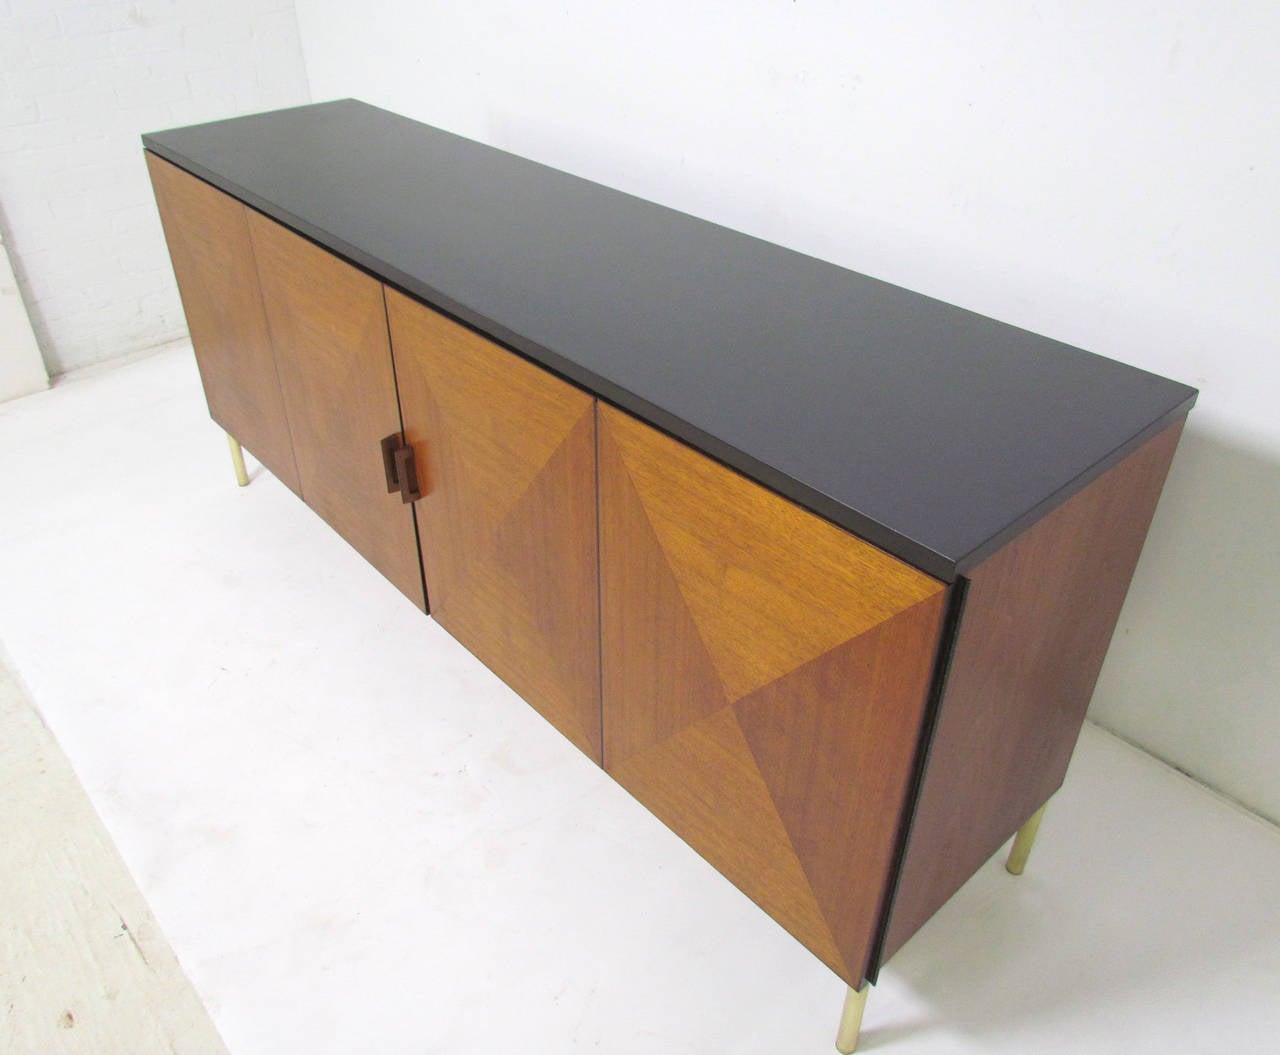 Rare credenza by Calvin for Directional furniture. The cabinet features a polished slate top and diamond pattern bi-fold doors and interior drawers finished with recessed lacquered pulls. Although we have been unable to definitively document this